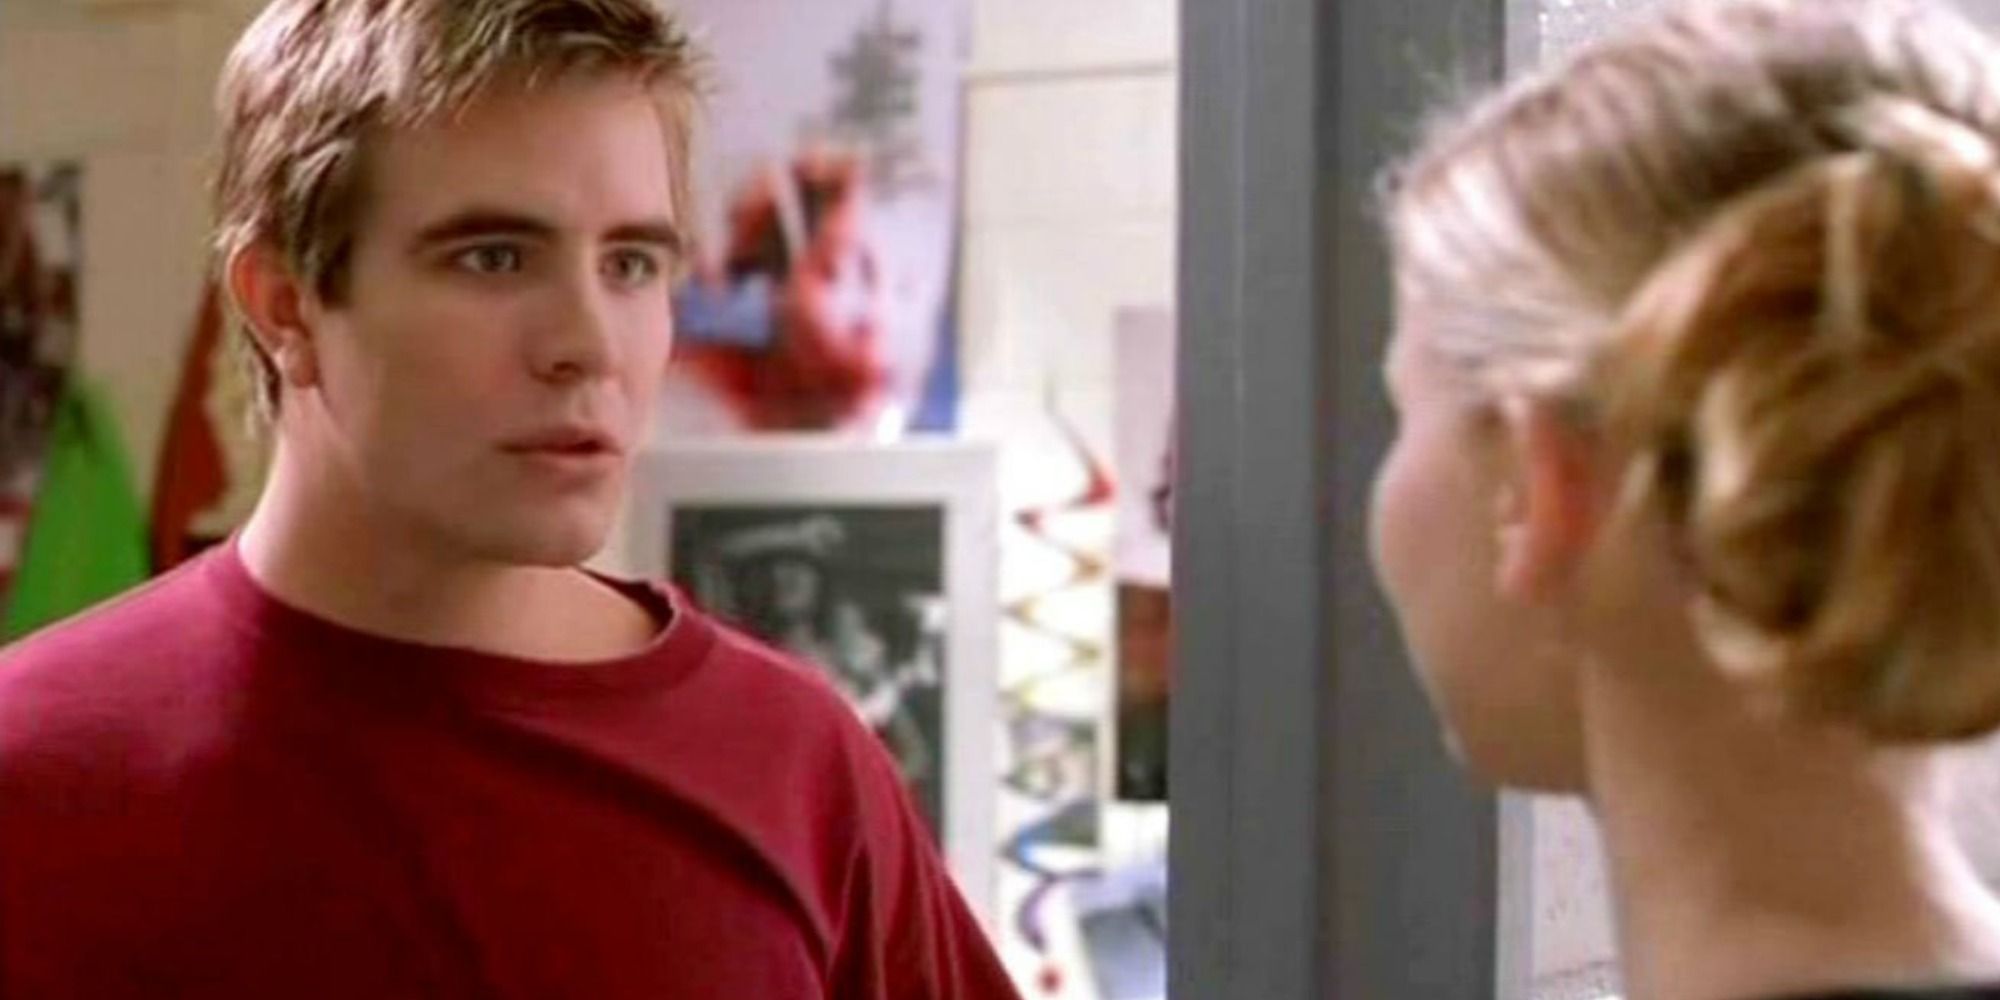 Torrance confronts Aaron at his dorm in Bring It On